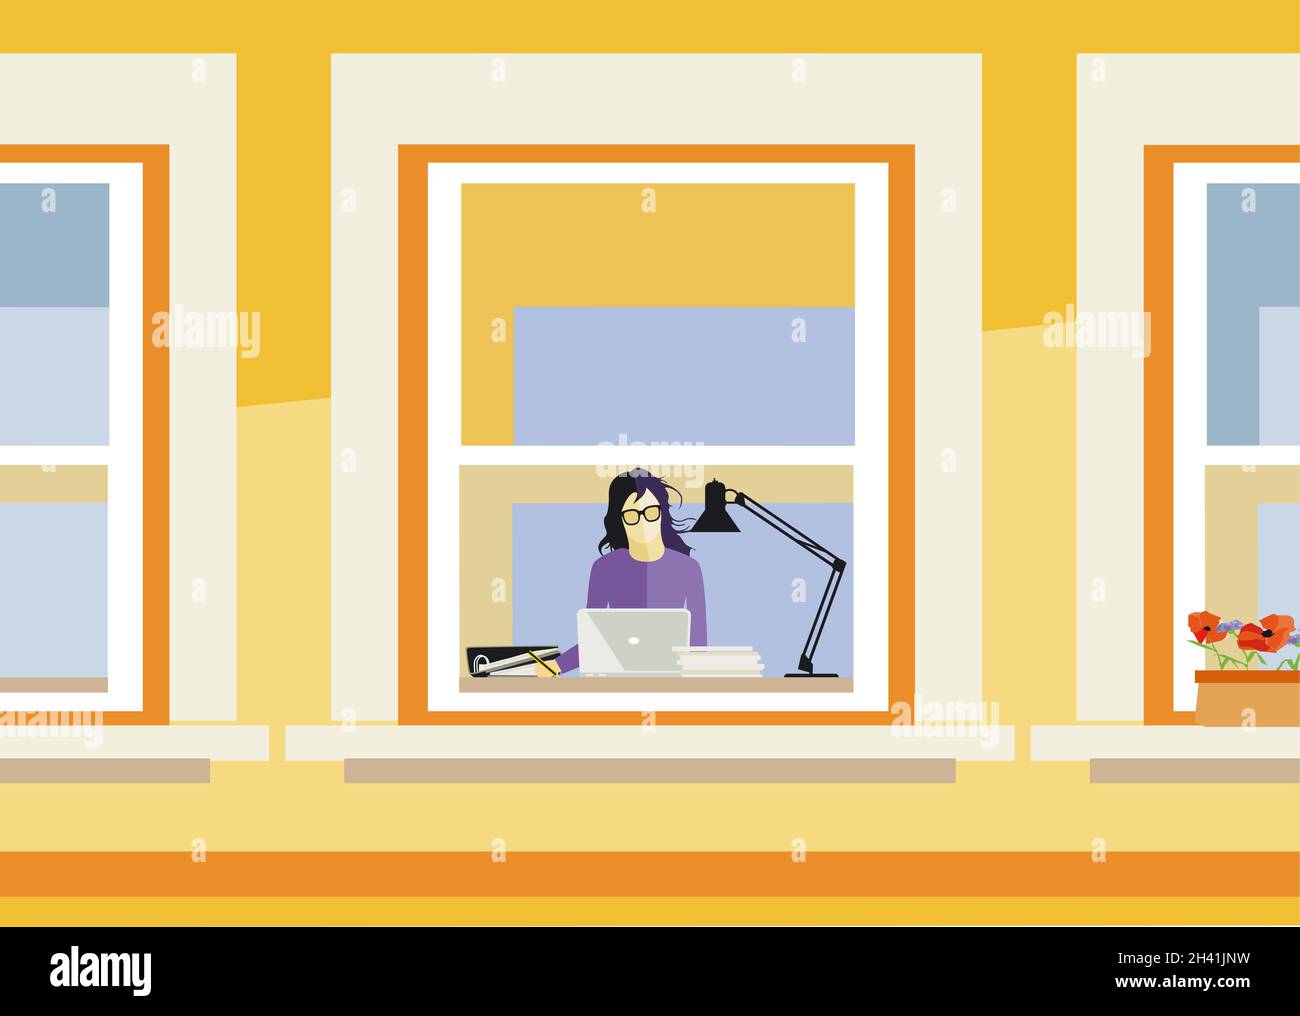 Young woman working at home, illustration Stock Photo